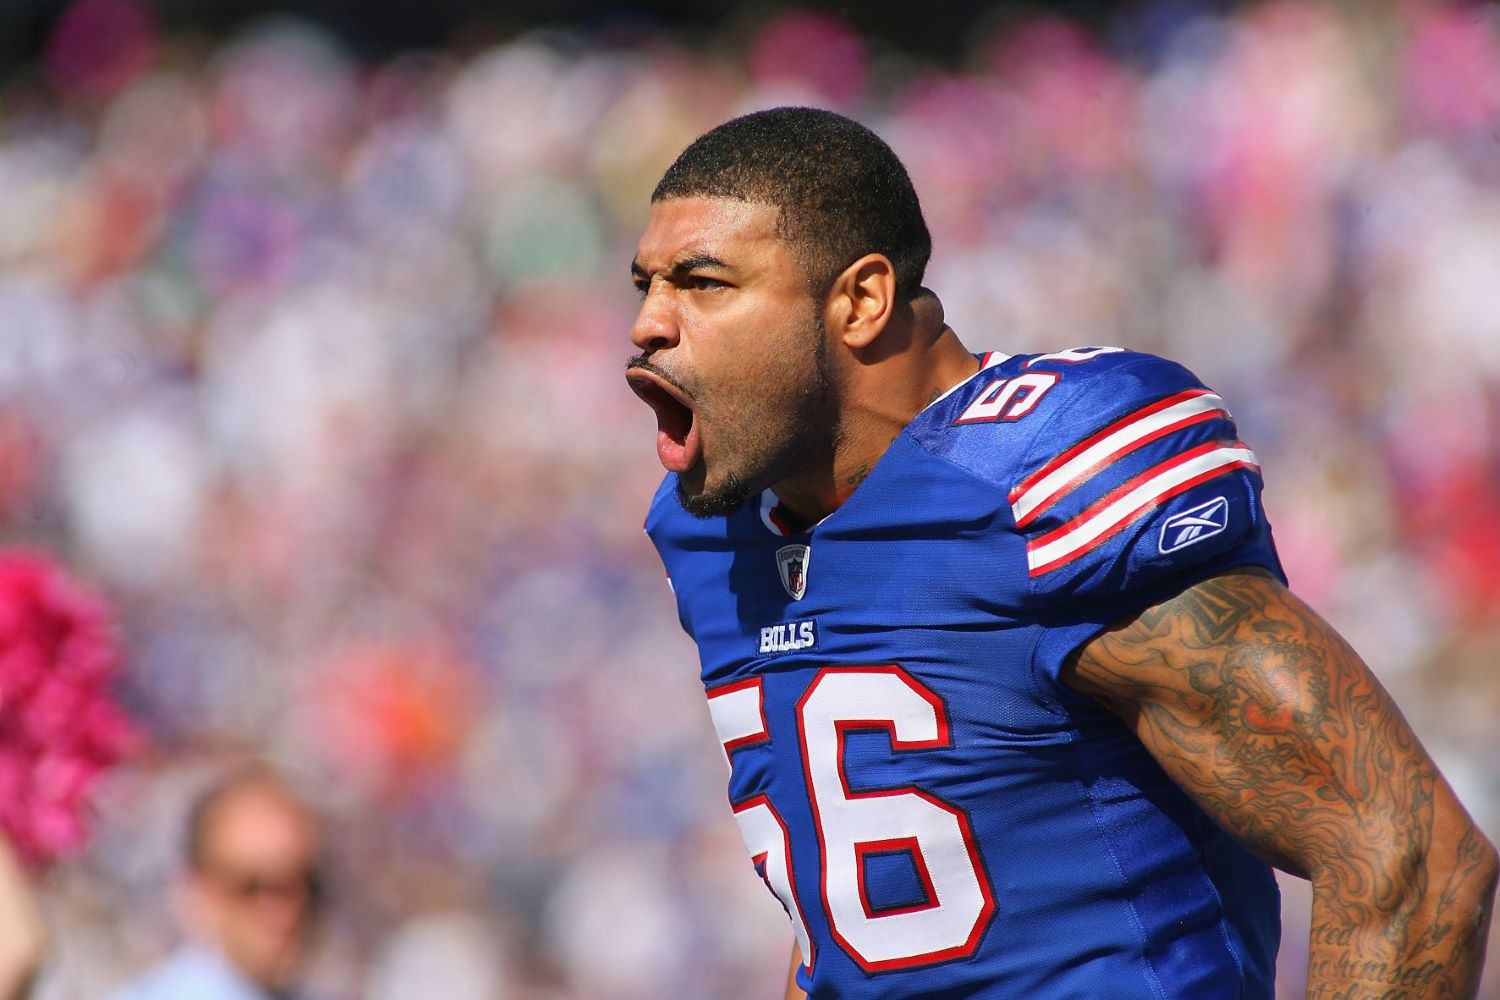 Shawne Merriman Advises Chargers To Look For Younger Coach